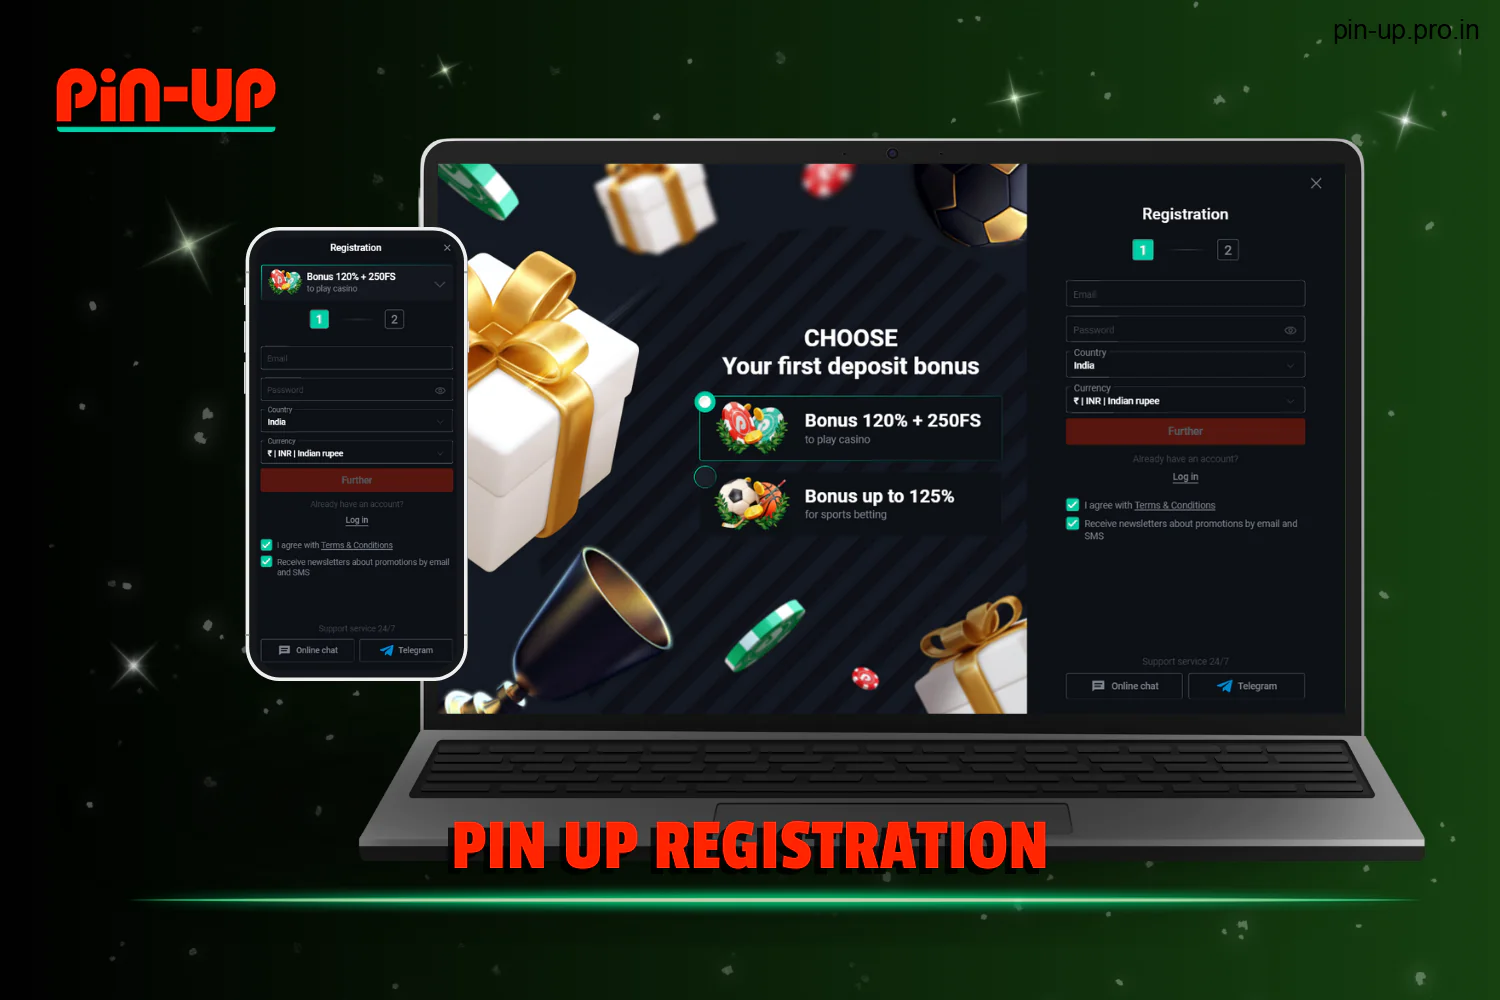 Every Indian user can complete the Pin Up registration process and begin betting, playing real money casino games